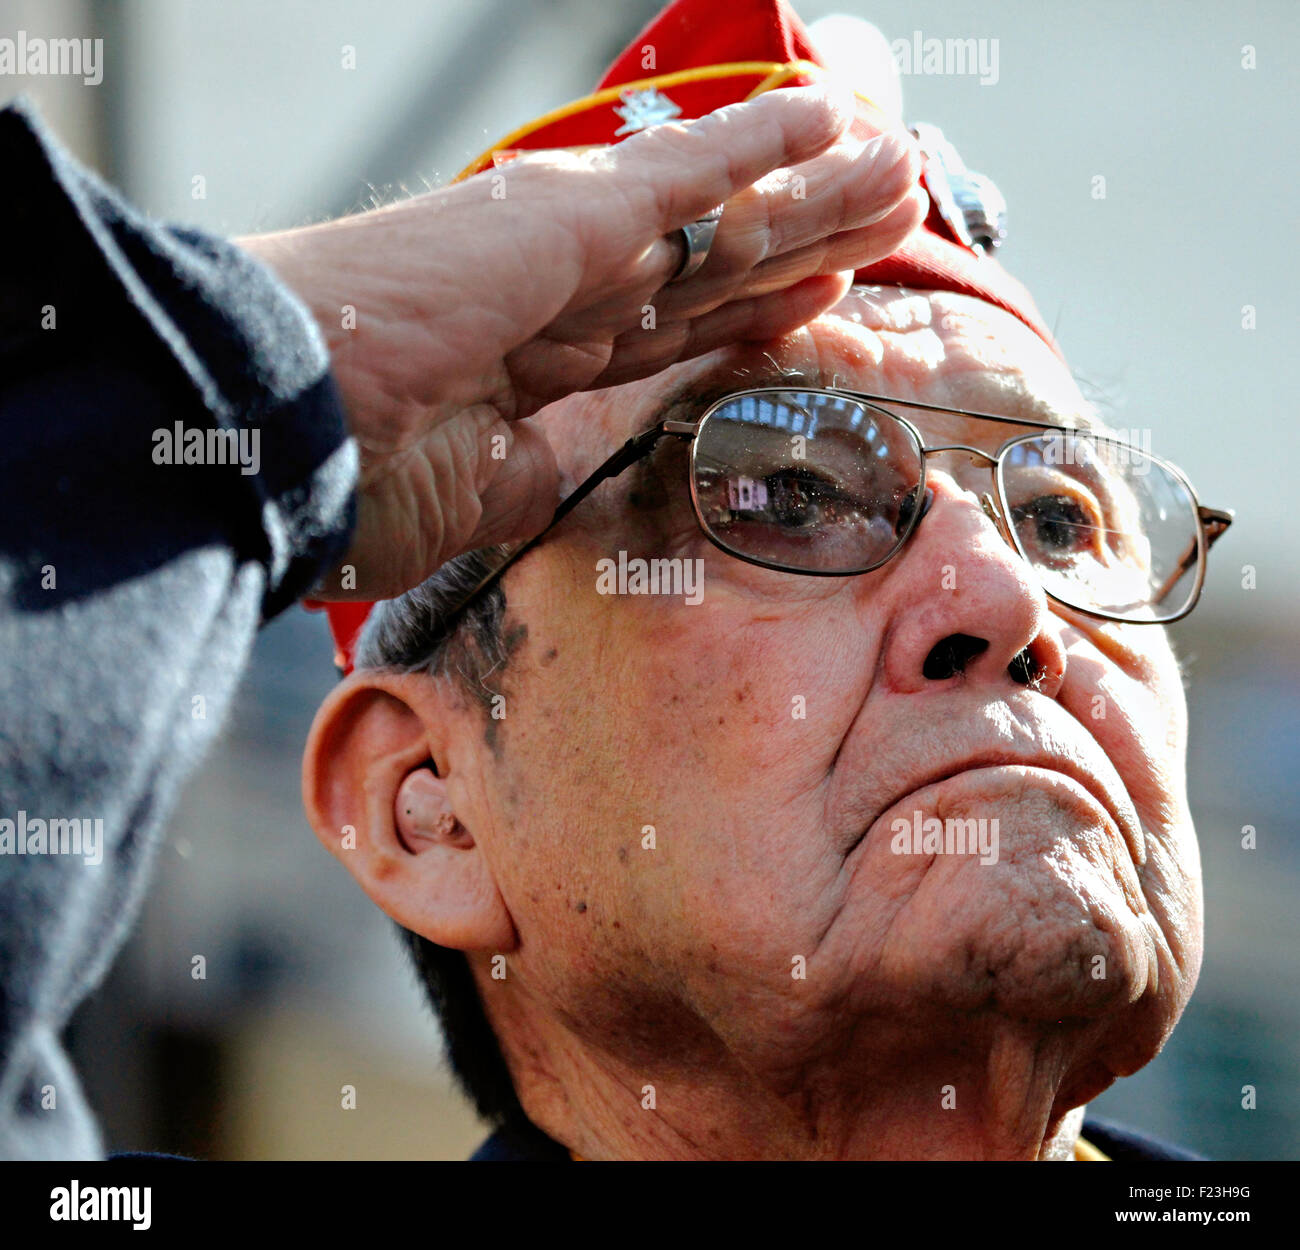 U.S. Marine Corps Cpl. Frank G. Willetto salutes during the playing of the national anthem at a ceremony commemorating the 65th anniversary of the Battle of Iwo Jima at the National Museum of the Marine Corps February 19, 2010 in Triangle, Virginia. Willetto was one of the original 29 Navajo Code Talkers of World War II. Stock Photo